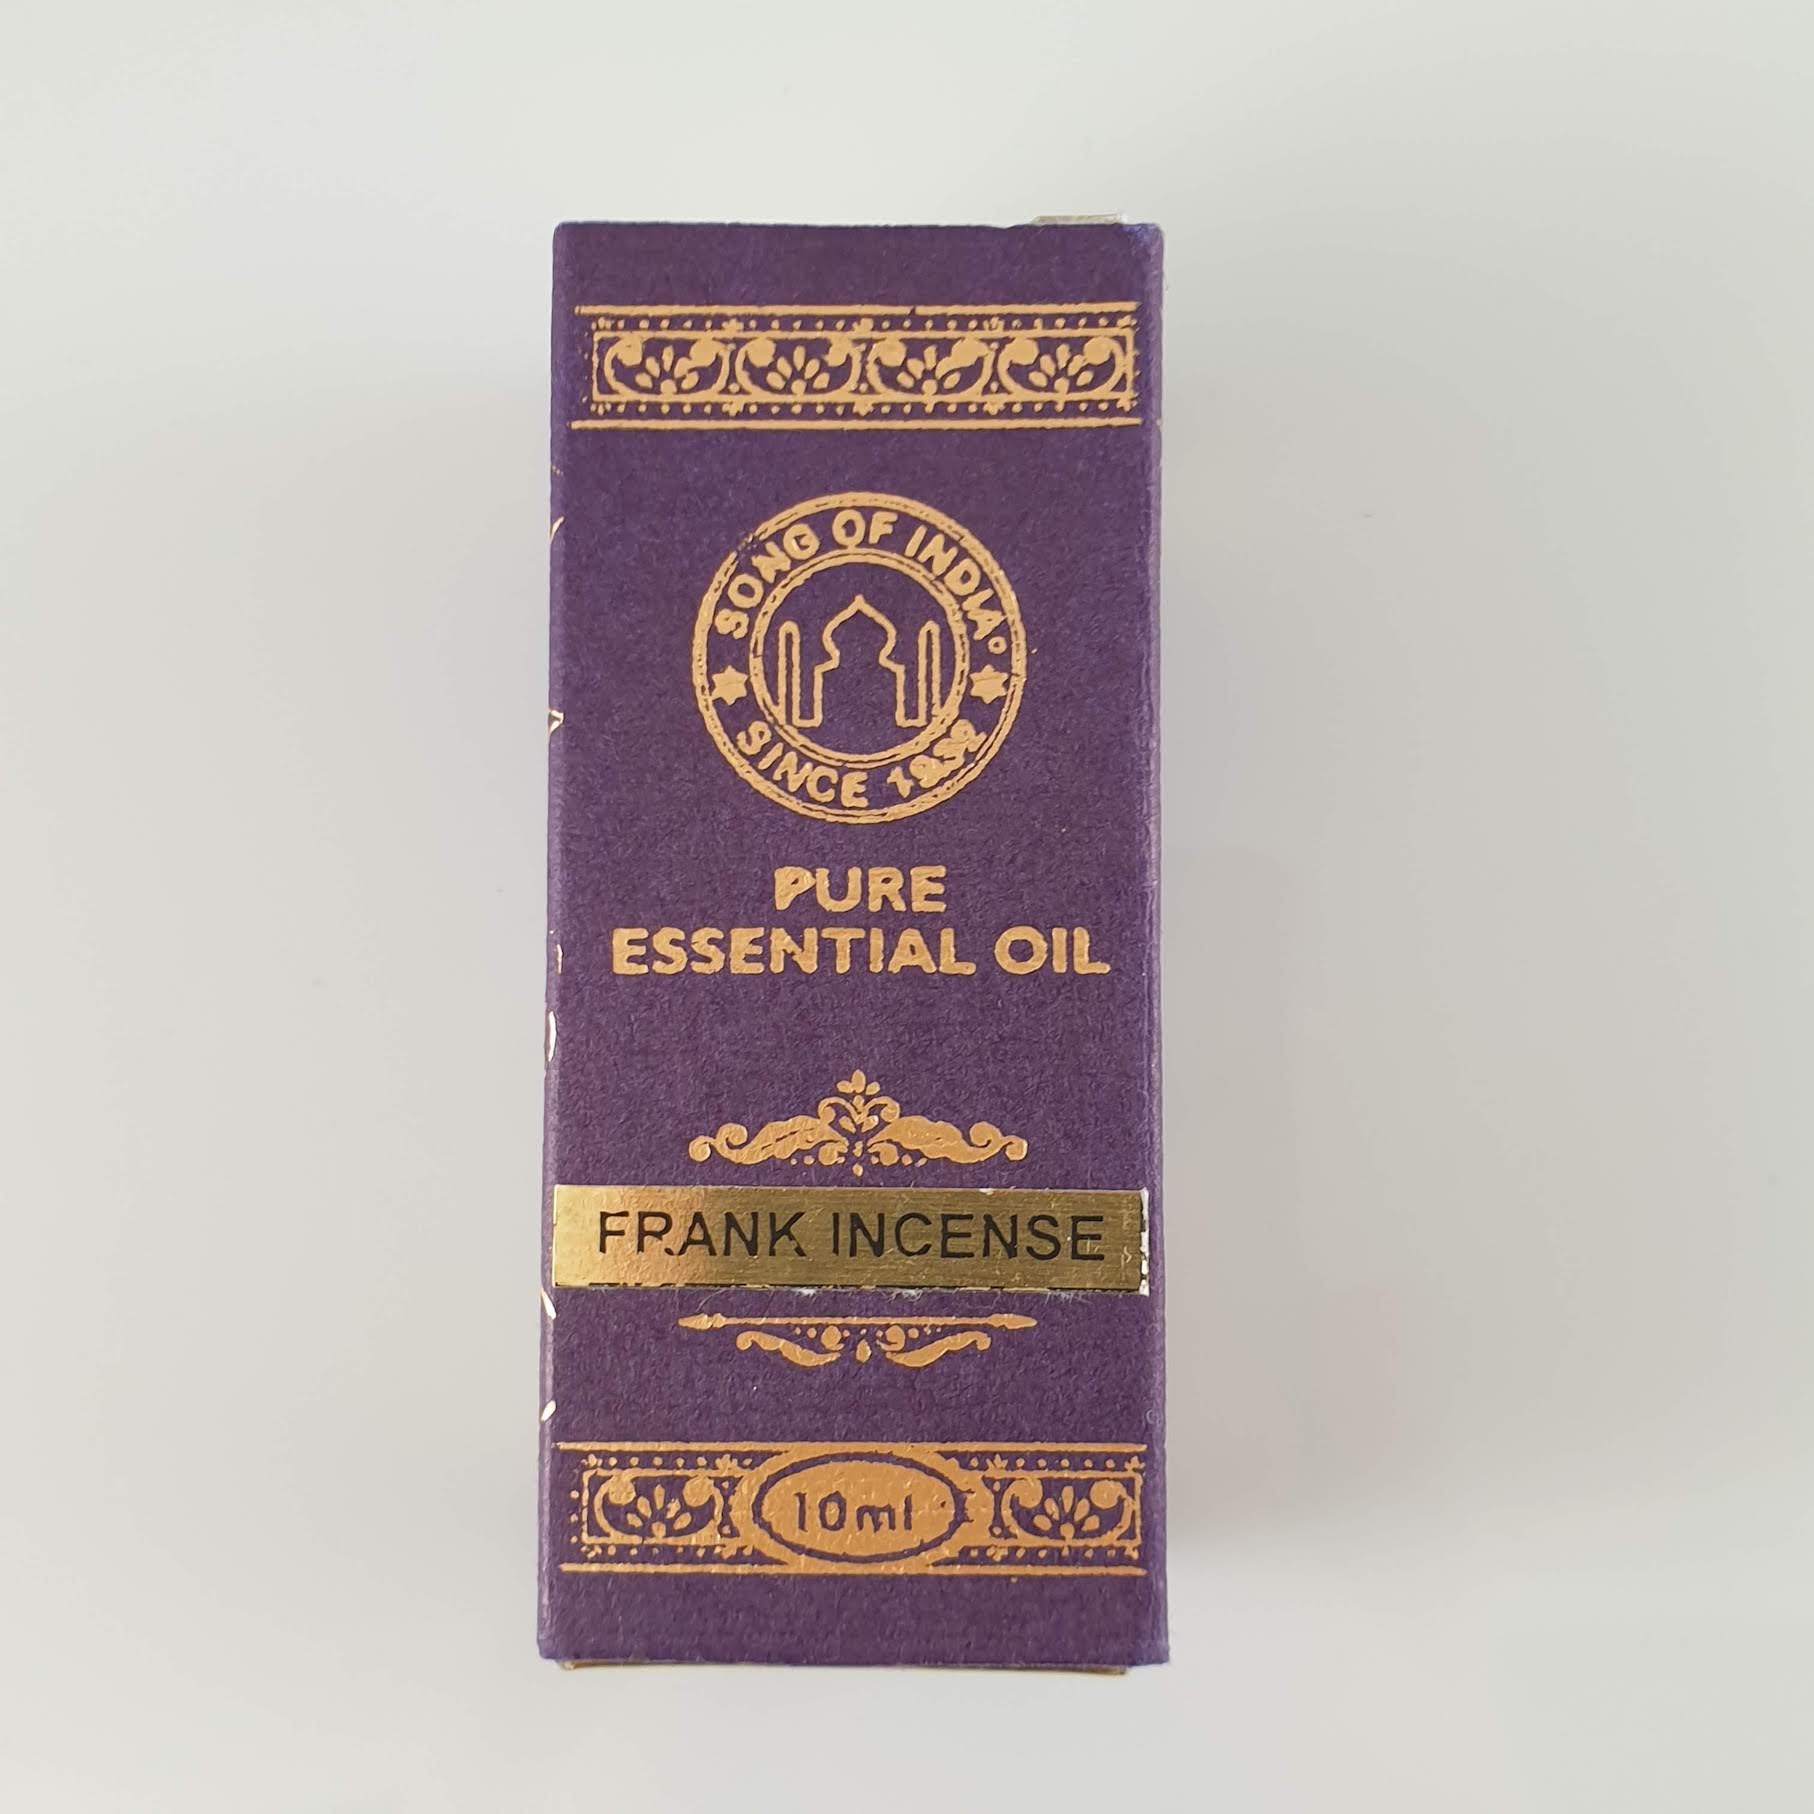 Song of India Essential Oil - Frankincense 10ml - Rivendell Shop